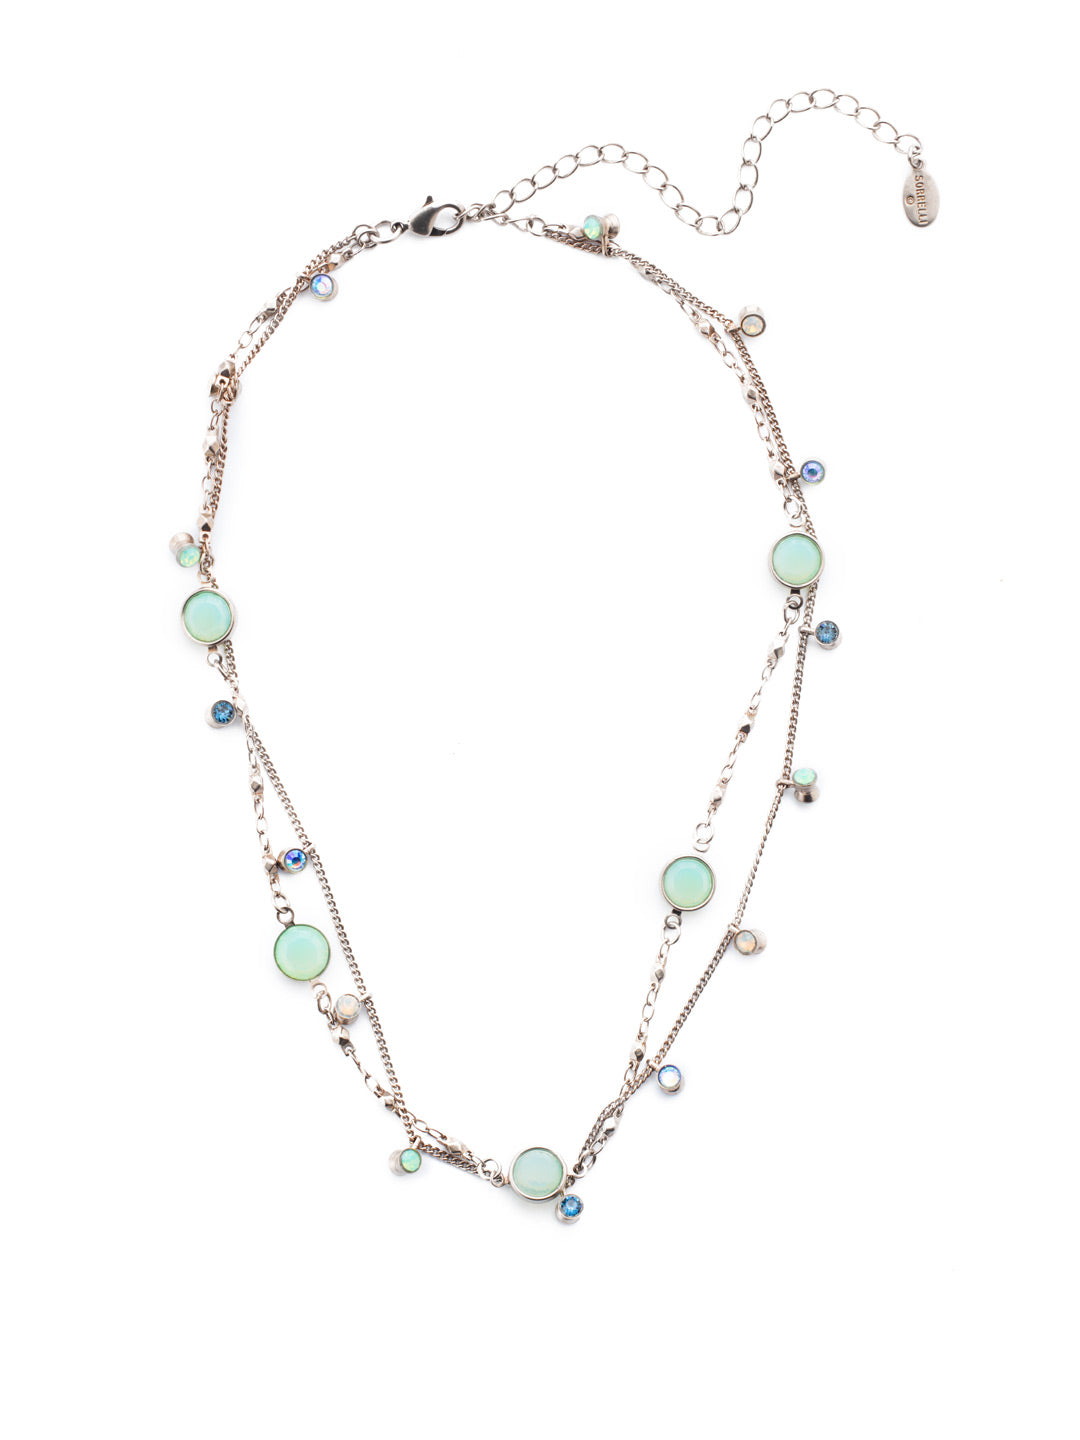 Dewdrop Layered Necklace - NEK36ASNFT - Delicate layers of chain drizzled with droplets of opaque crystals. A quick and easy solution for a layered look with one piece. From Sorrelli's Night Frost collection in our Antique Silver-tone finish.